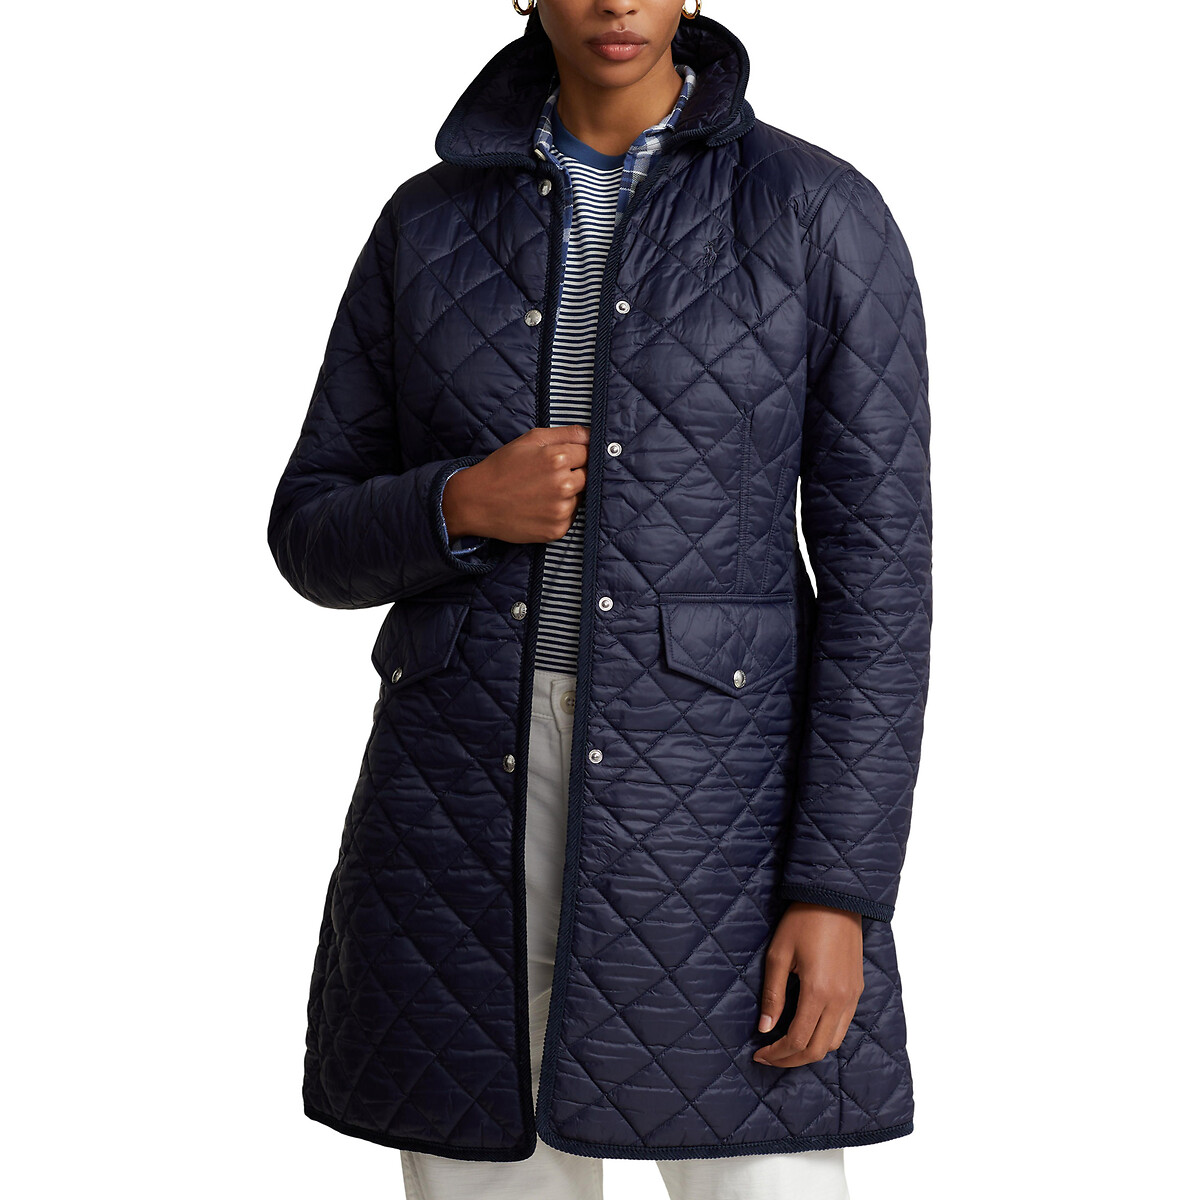 Quilted, Padded Jacket with Press-Stud Fastening, Mid-Length